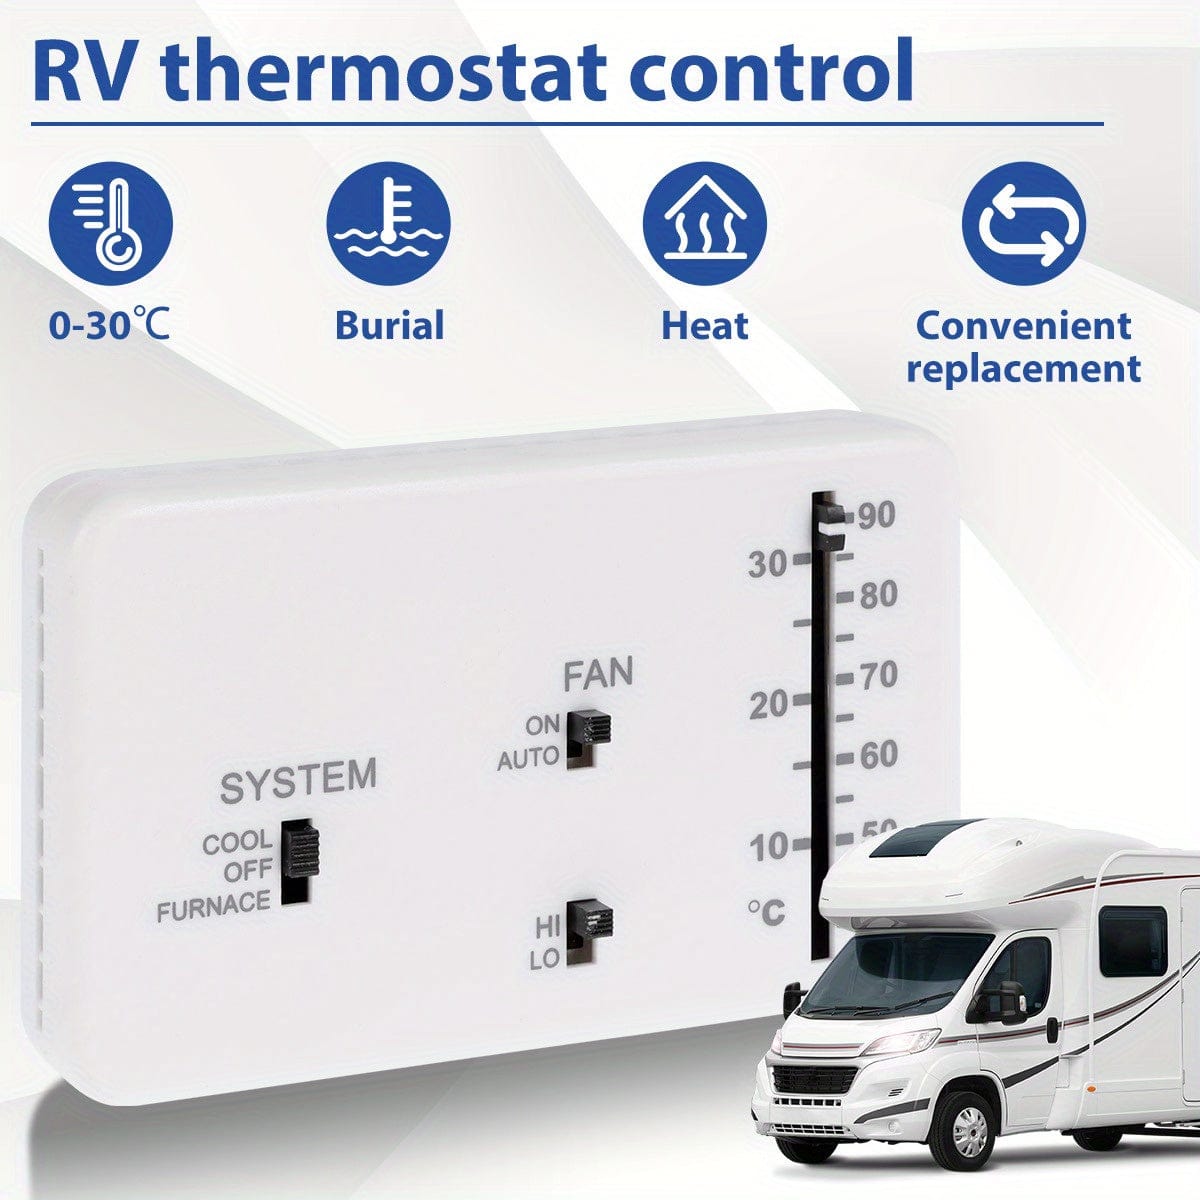 RV Thermostat Plastic RV Analog Thermostat Replacement Heat And Cool Camper Thermostat Kit With 2pcs Screws And 2pcs Rubber Particles For Camper RV